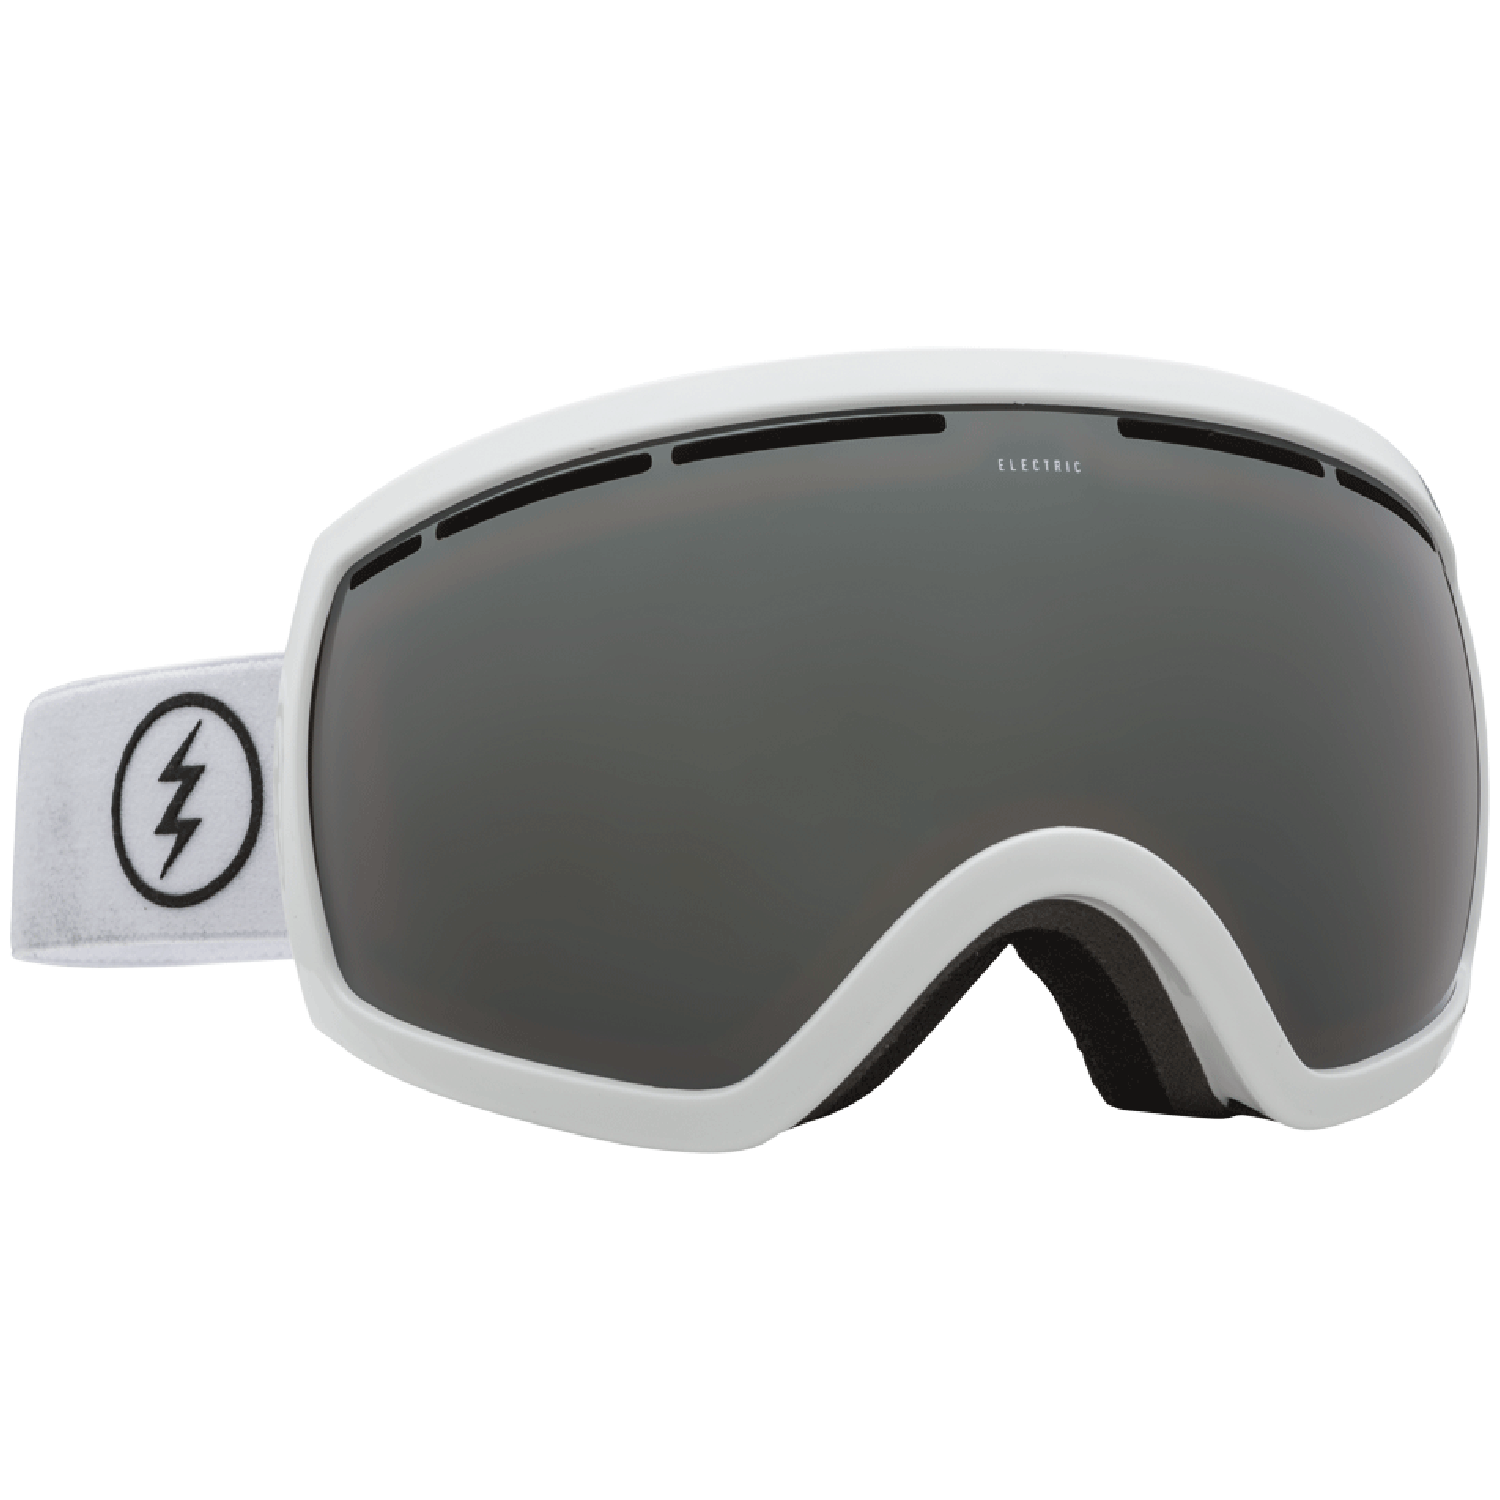 Electric EG2.5 Snow Goggle Lens Grey Polarized Blister Pack with Instructions 